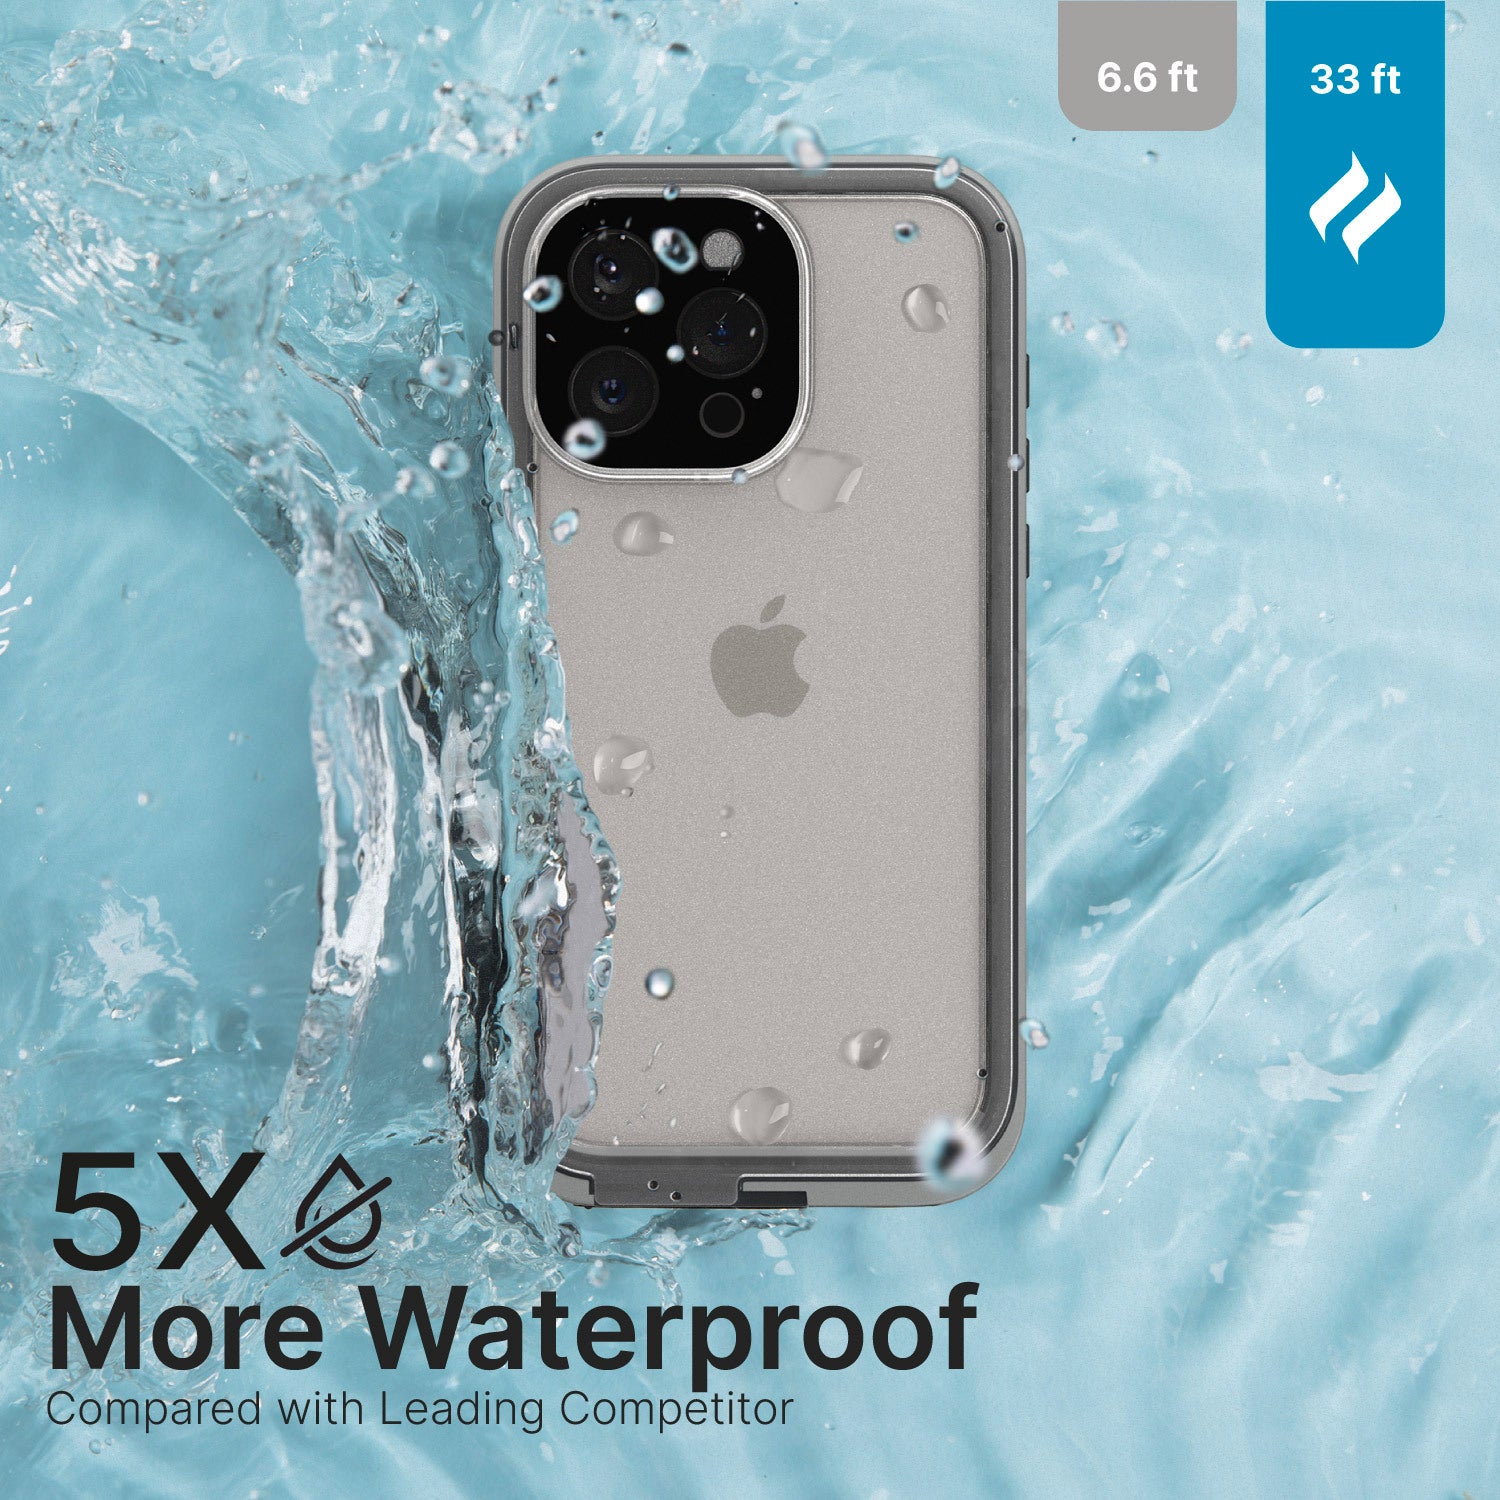 CATIPHO15GRYMP-FBA | Catalyst iPhone 15 Pro Waterproof Case Total Protection case splashed in water 5 times more waterproof